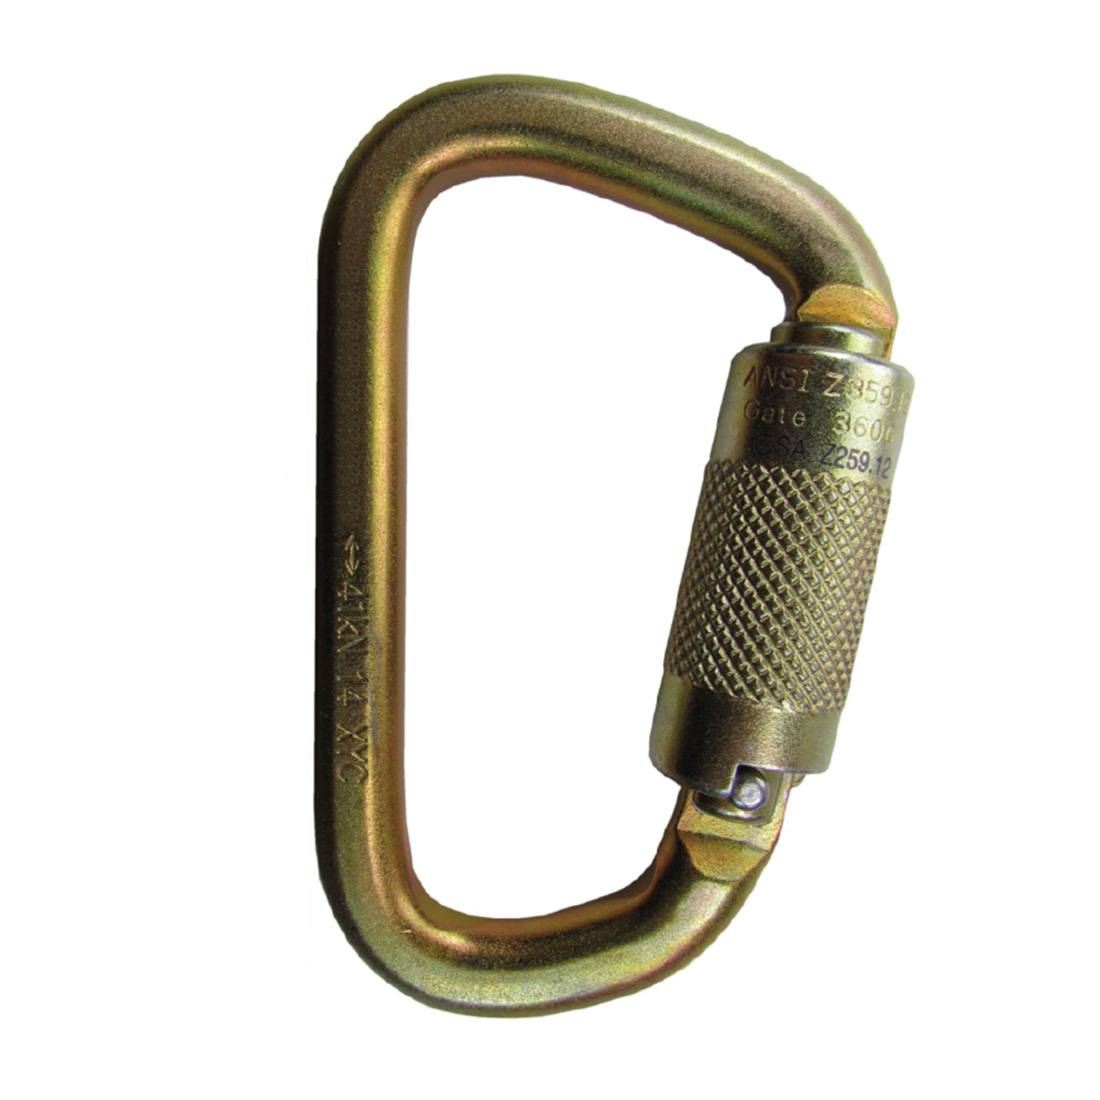 Sky Genie EB-2 Descent Chair System Carabiner View